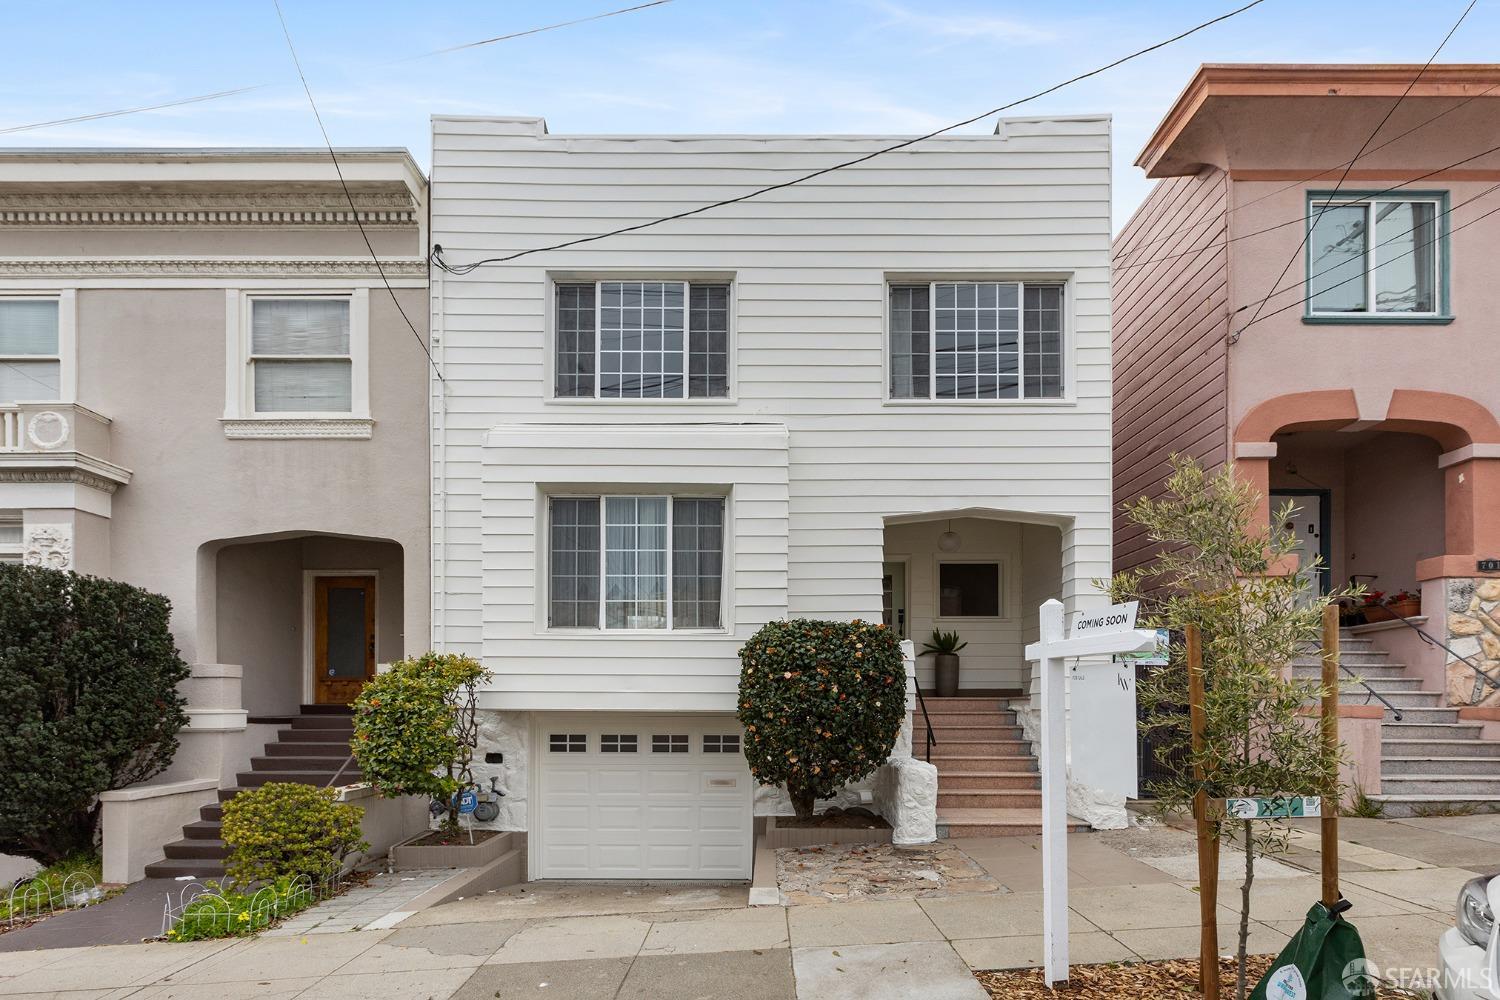 Photo of 707 27th Ave in San Francisco, CA